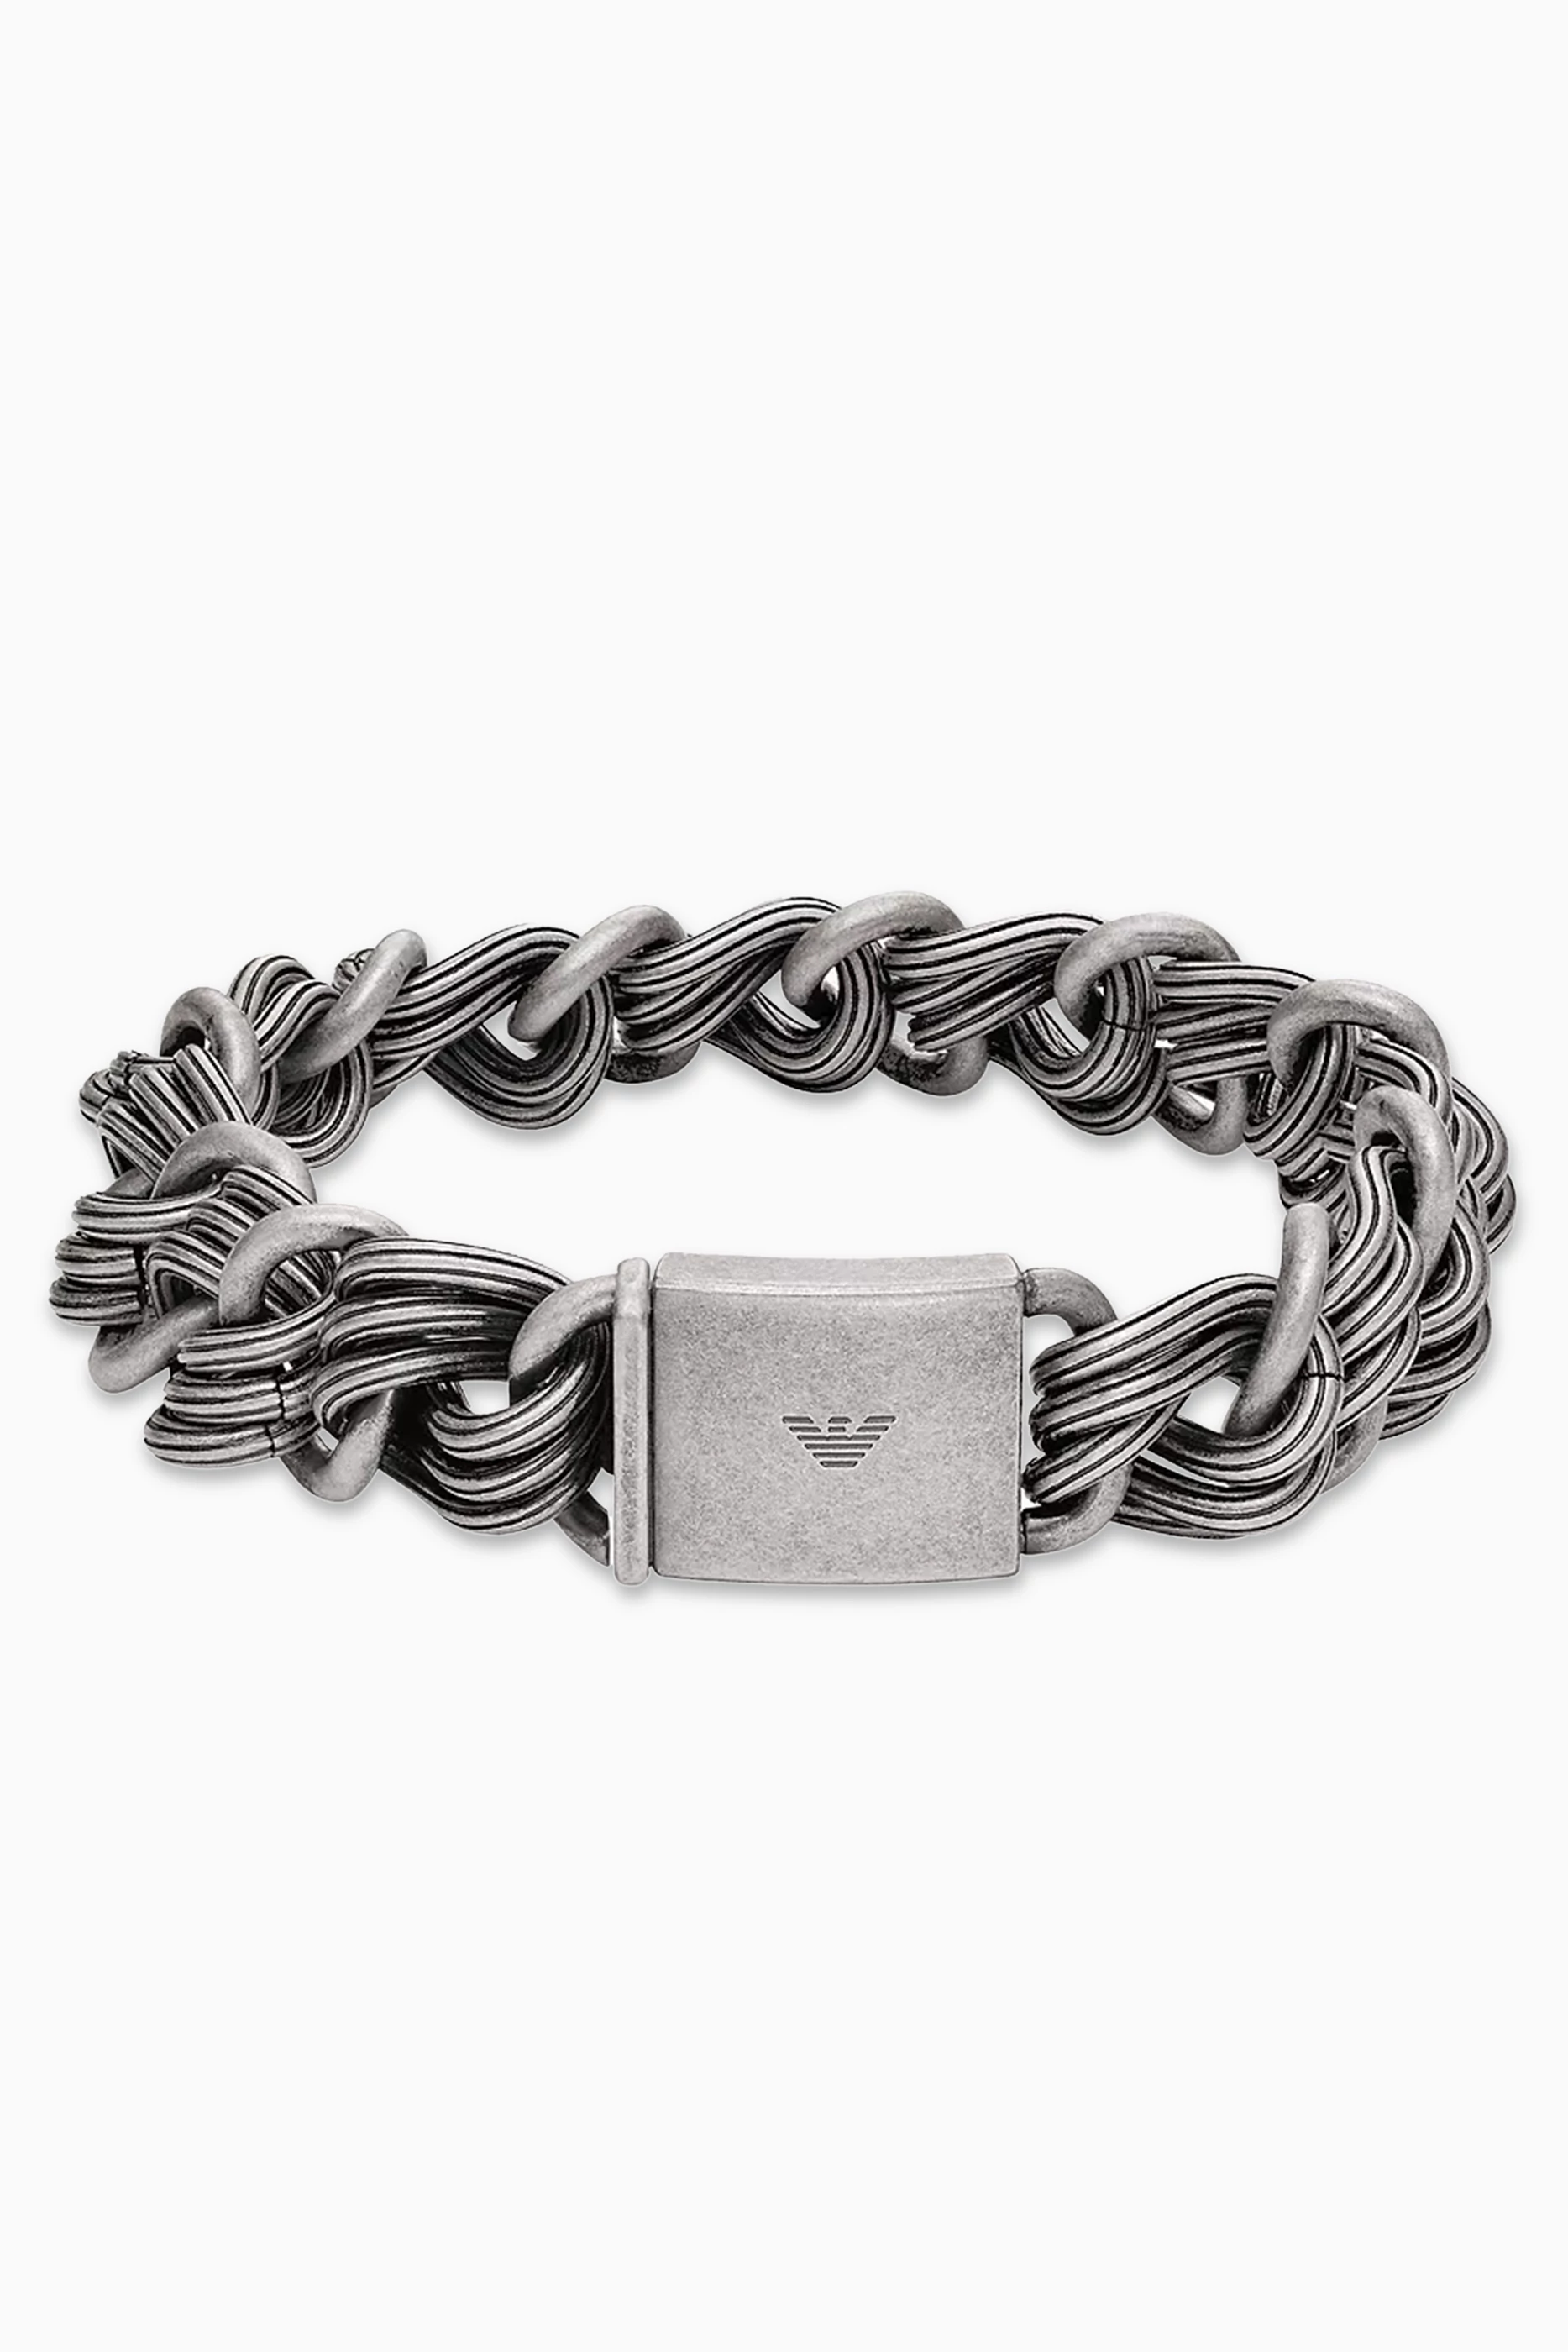 Buy Emporio Armani Silver Iconic Trend Bracelet in Stainless Steel ...